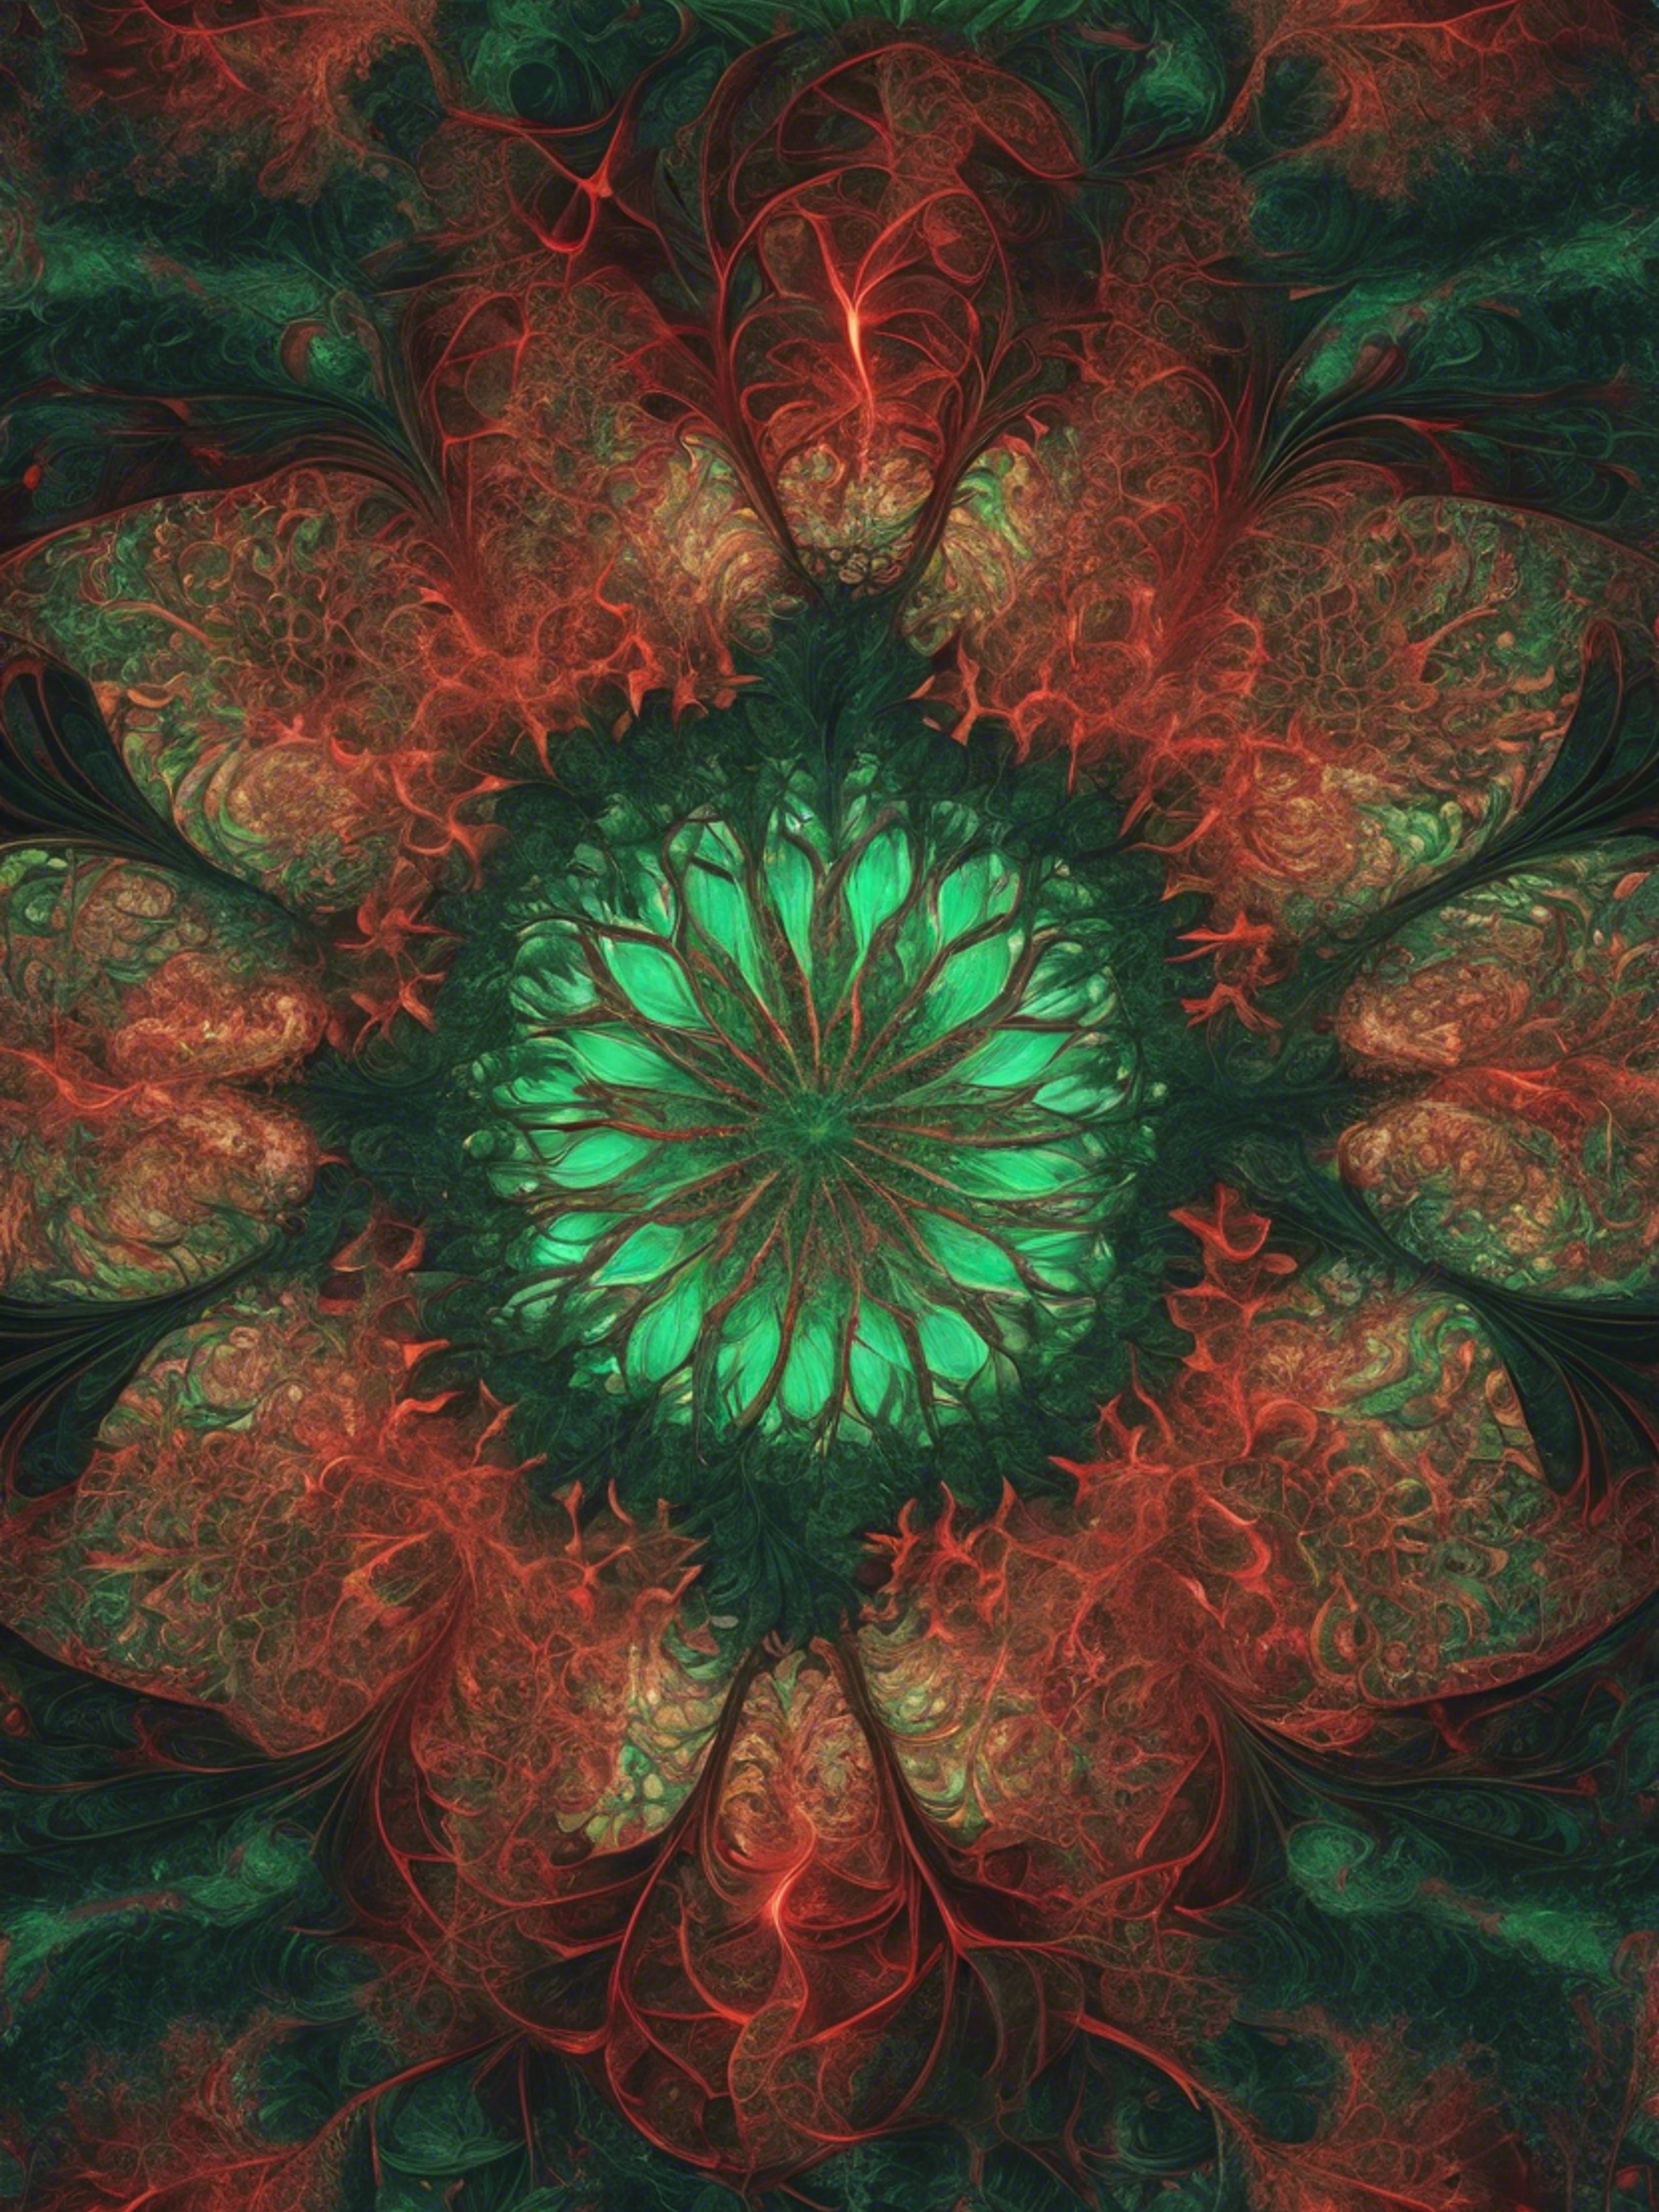 Intricate fractal patterns composed of alternating red and green hues Ταπετσαρία[0376ed7744fd4b80a9ab]